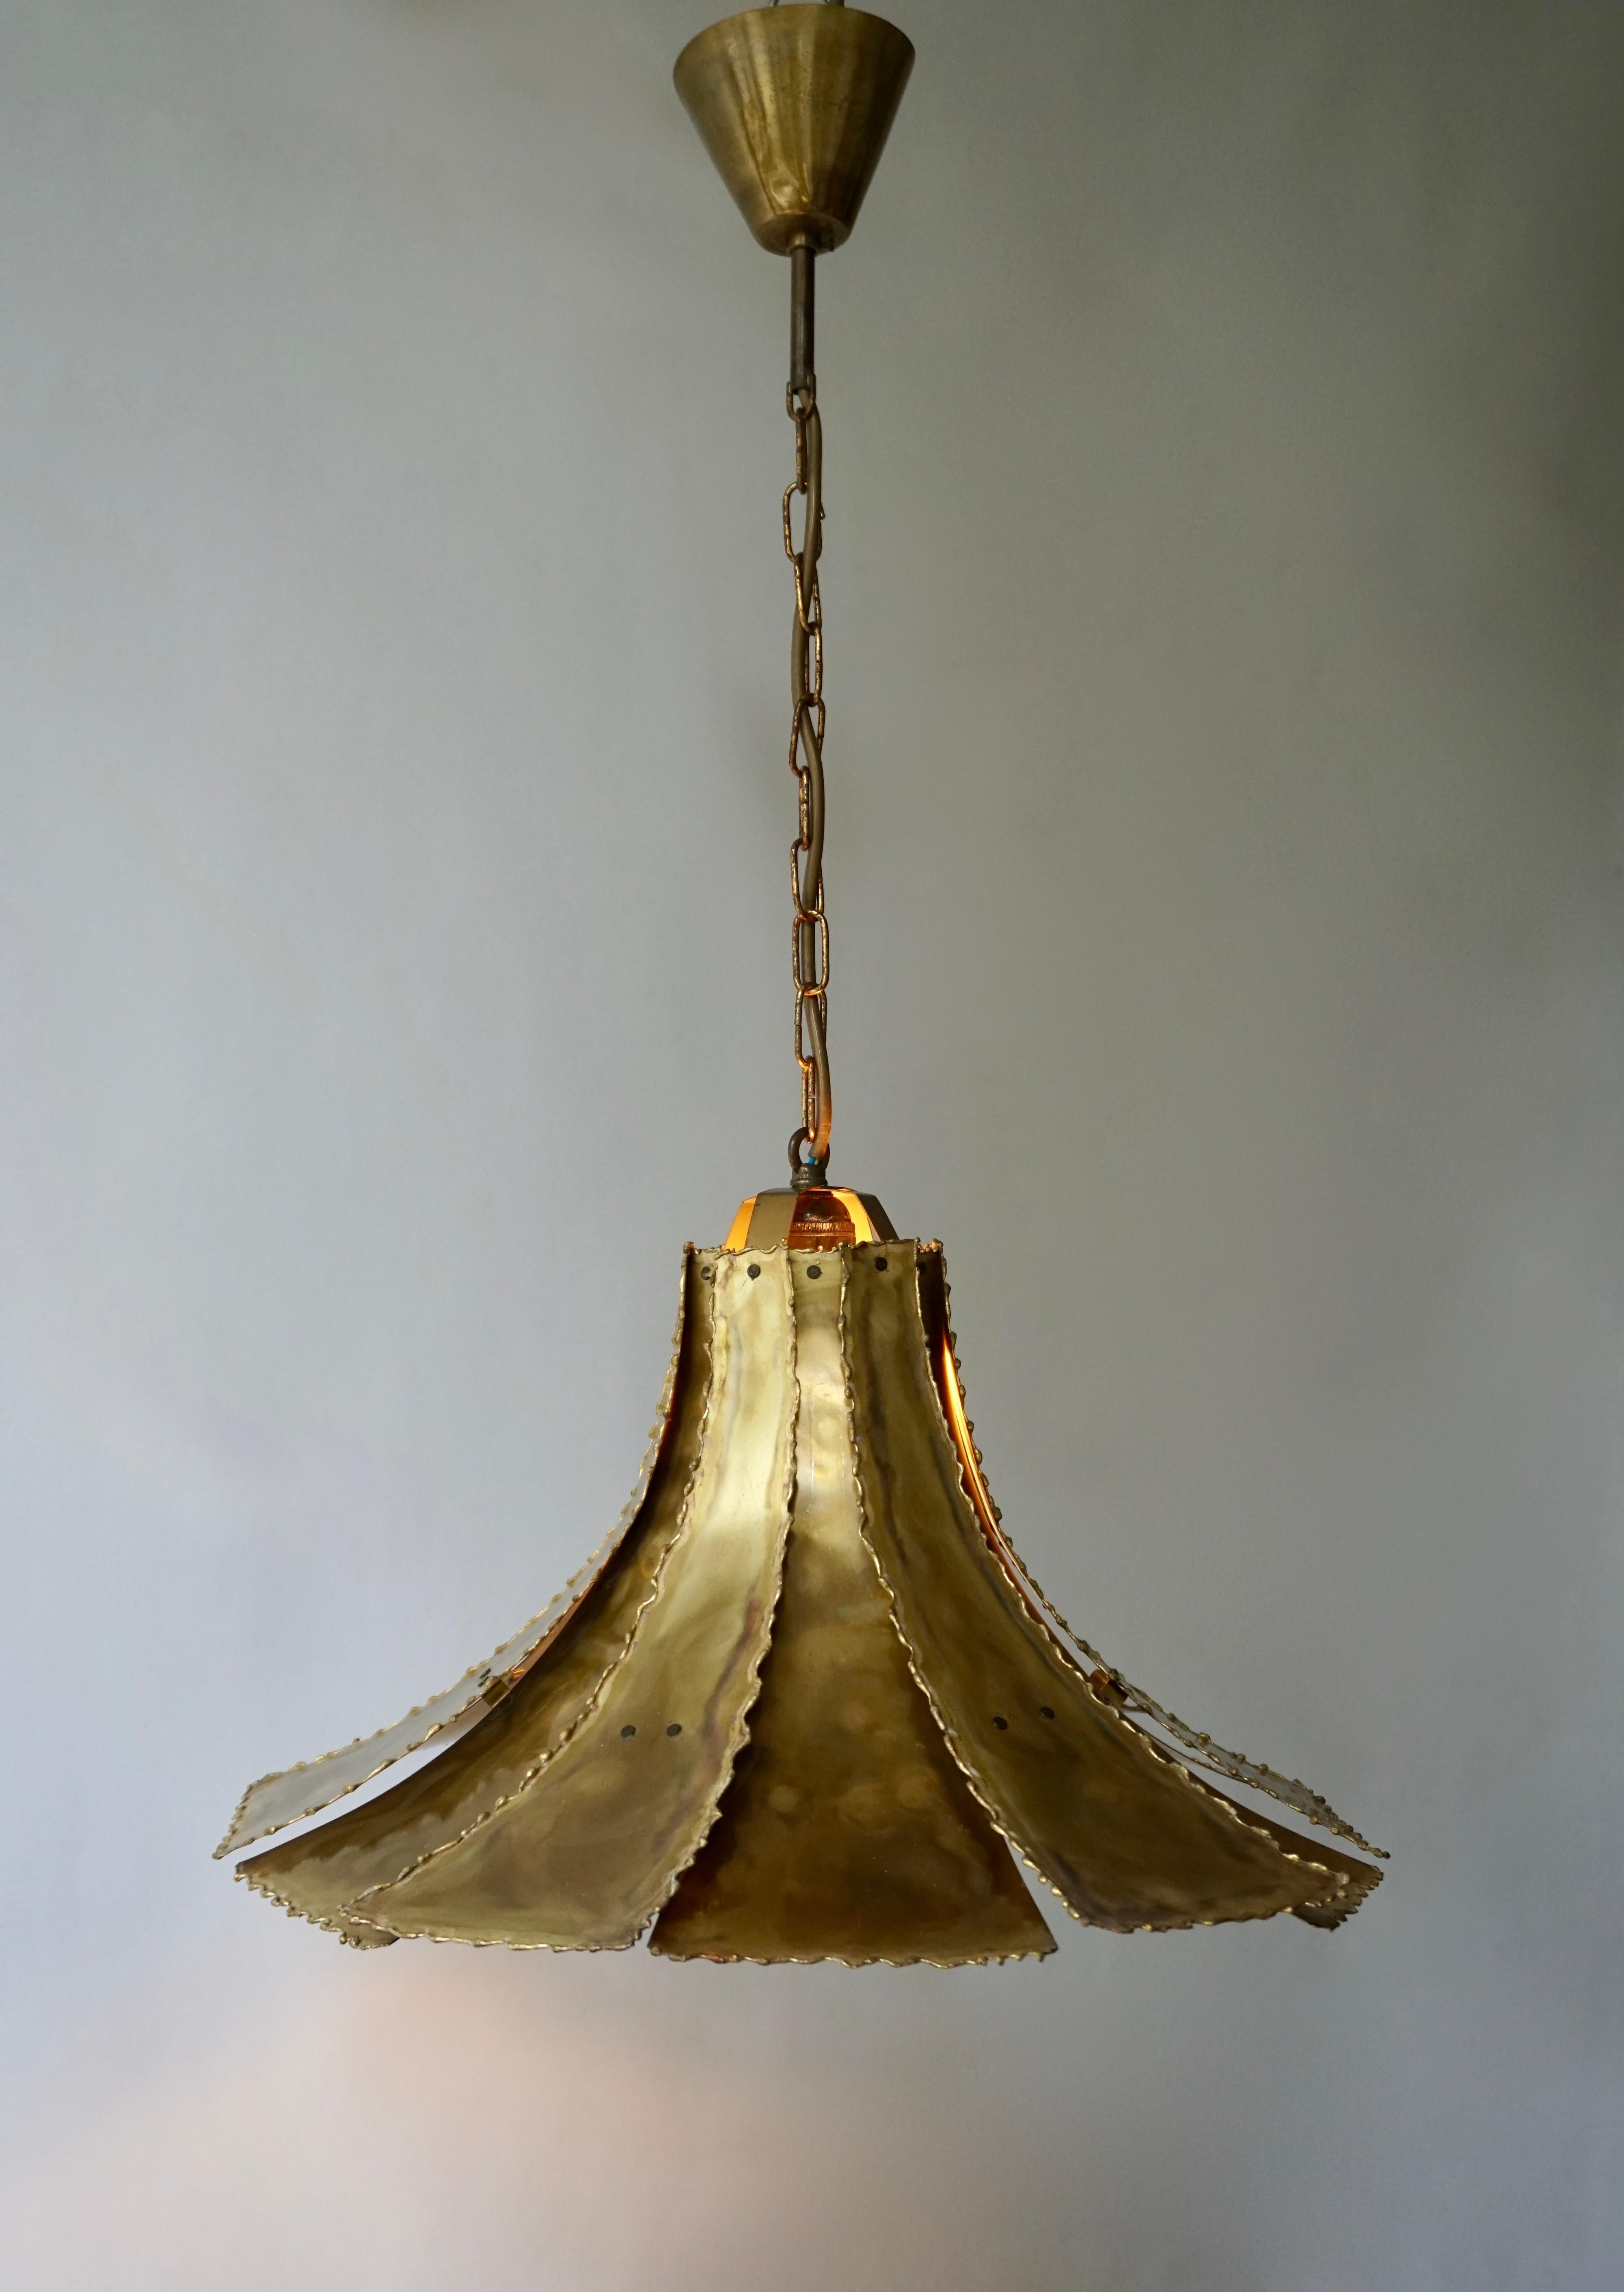 Mid-Century Modern Brutalist chandelier, made in oxidized brass, stamped: Holm Sorensen in the canopy.
Denmark, 1960s 1 E27 light medium base socket. 

Diameter:18.8 inch.
Height without chain: 10.6 inch. 
Total height with chain and canopy: 29